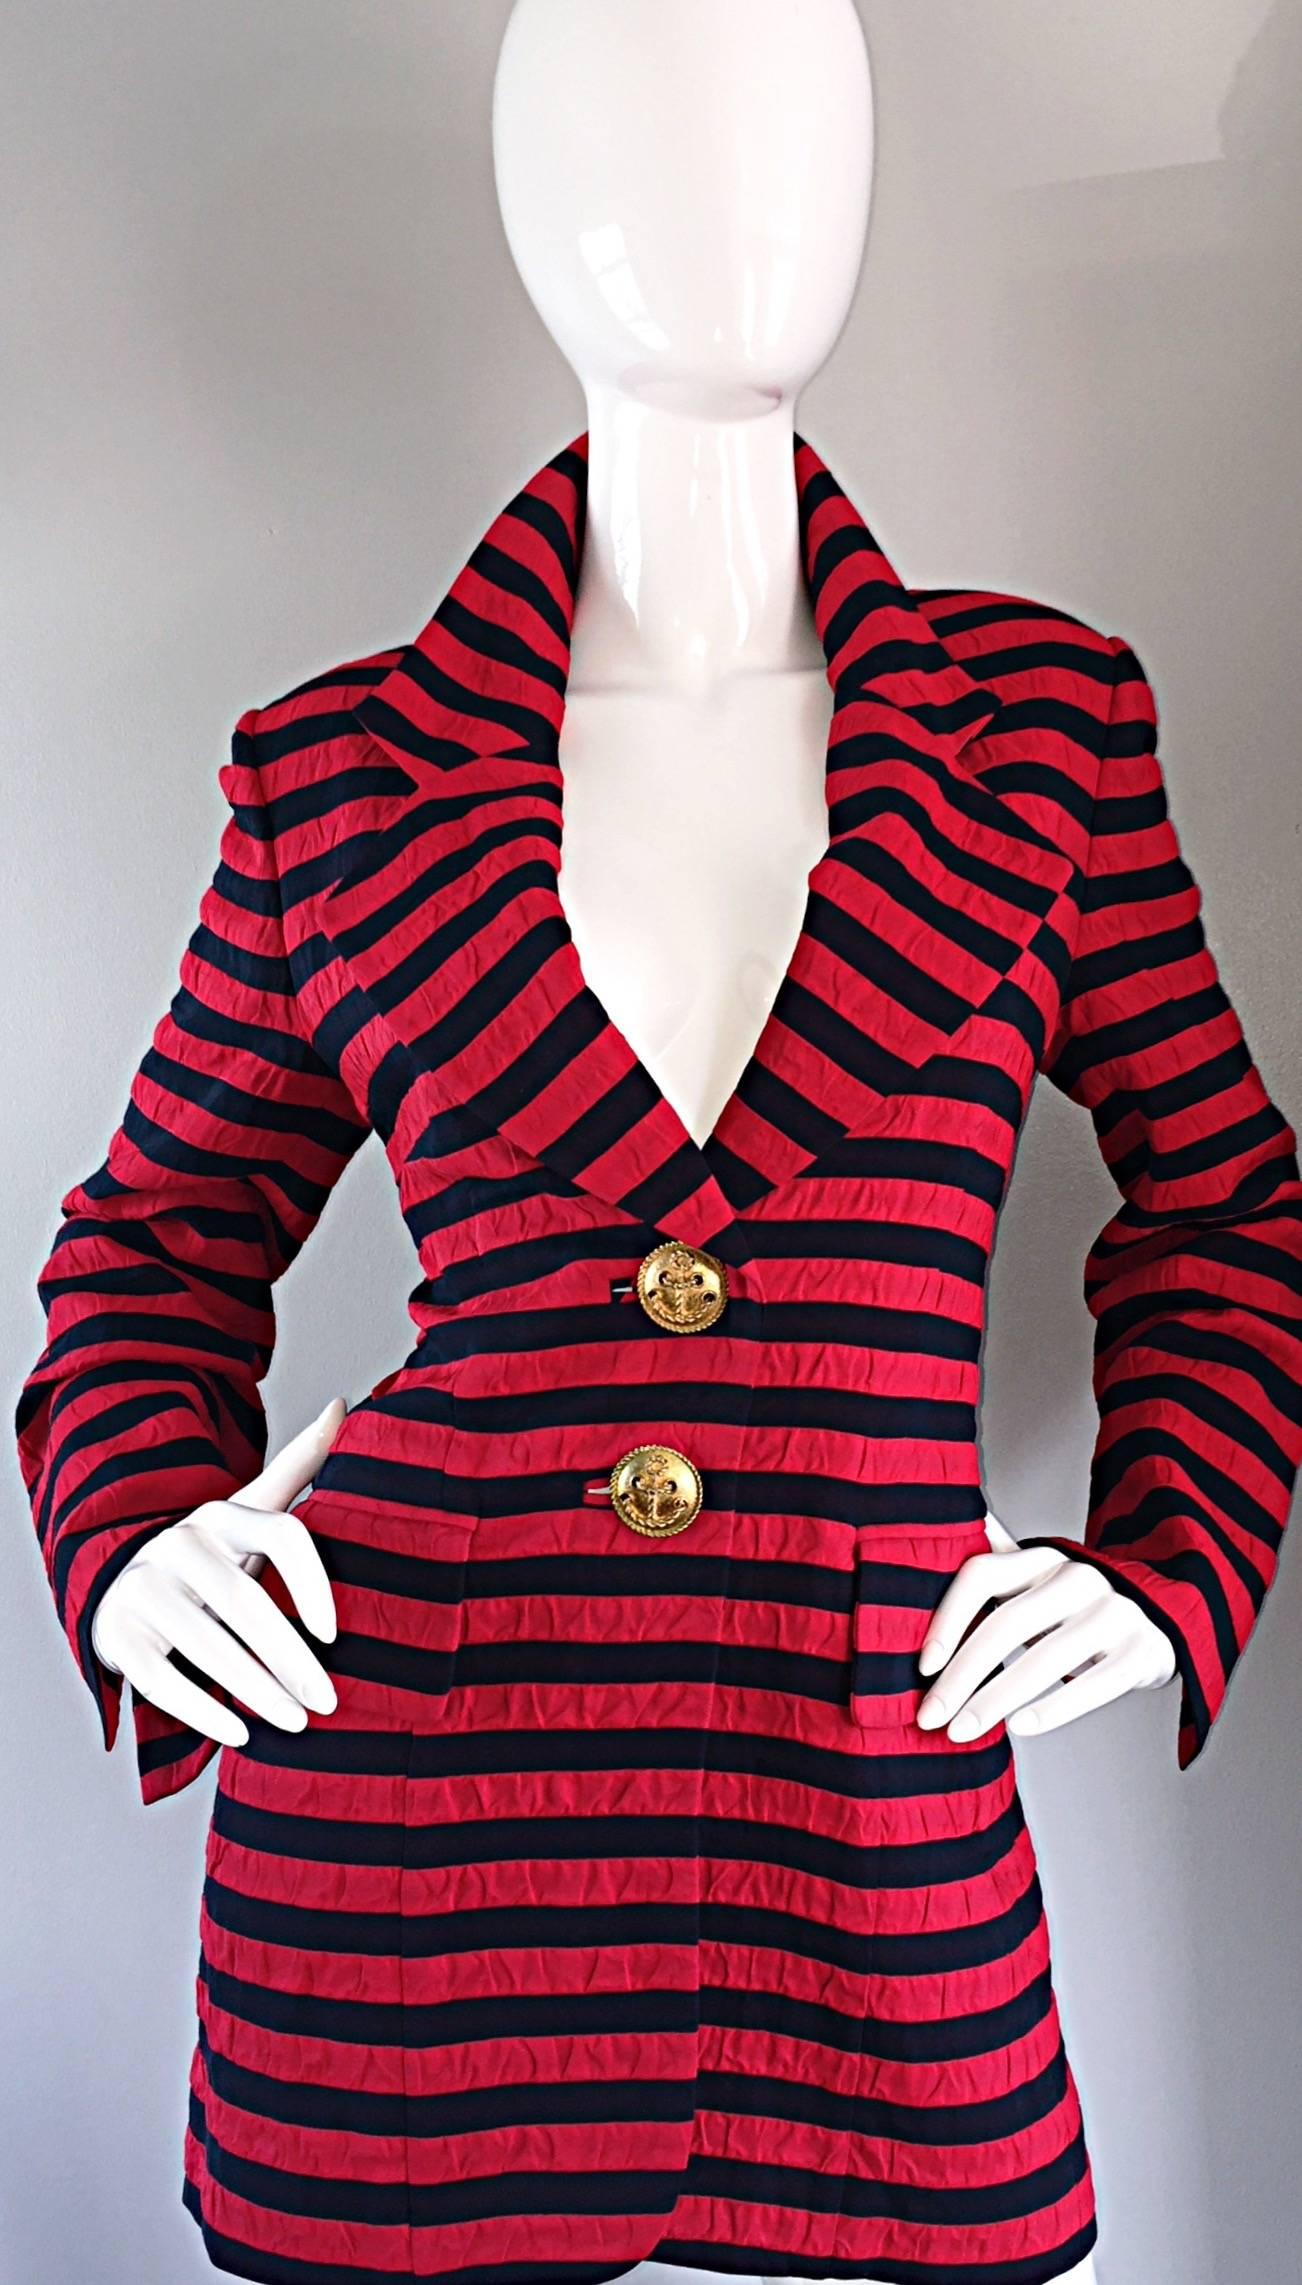 Incredible vintage CHRISTIAN DIOR Couture / Numbered blazer jacket! Nautical themed, with navy blue and red stripes. Chic gold oversized anchor buttons down the bodice. Very flattering fit. Great with jeans, white trousers, or a skirt. Pockets at